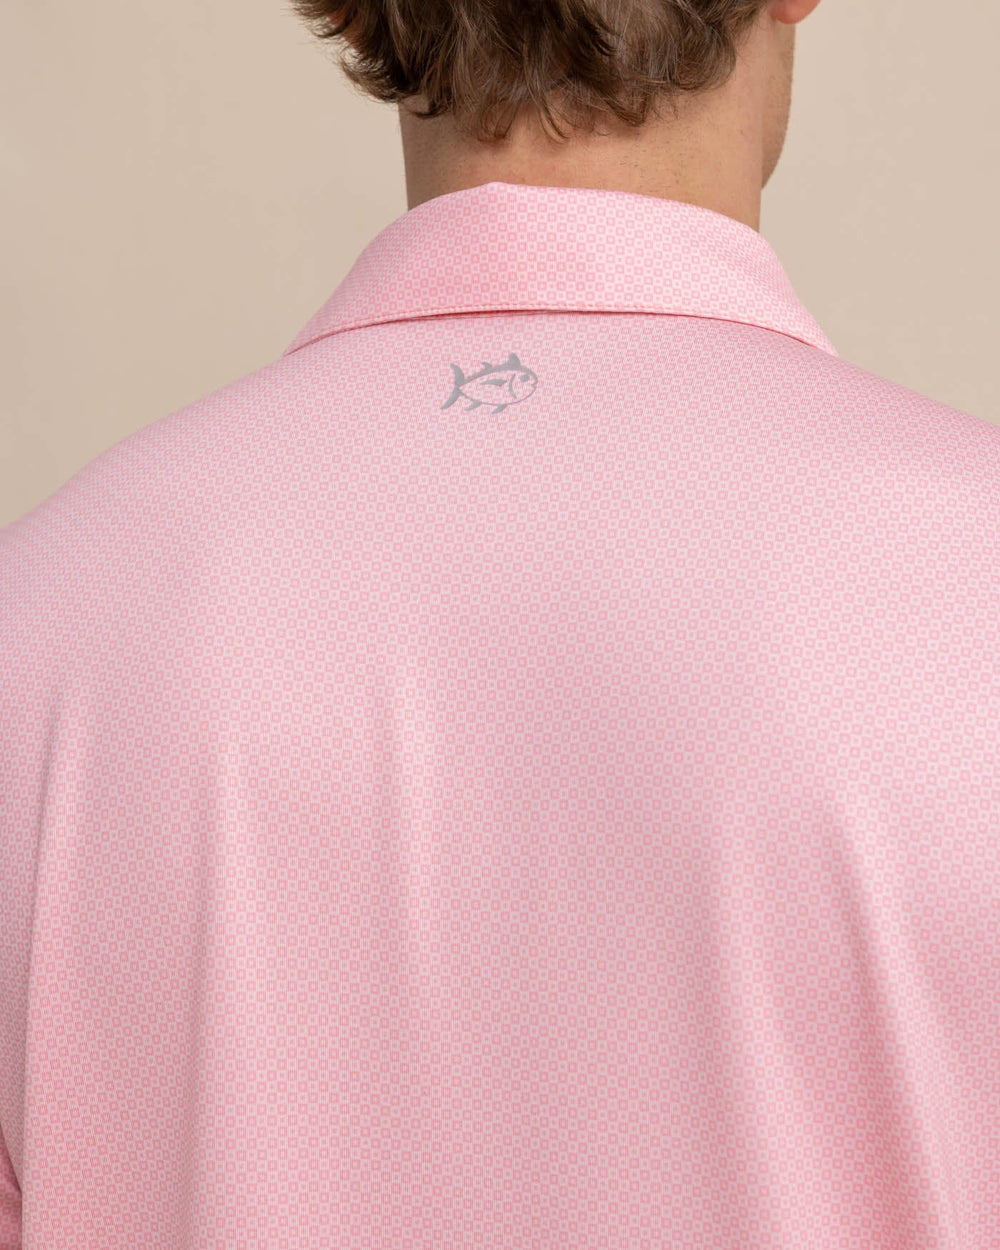 The detail view of the Southern Tide Driver Coastal Geo Polo Shirt by Southern Tide - Flamingo Pink